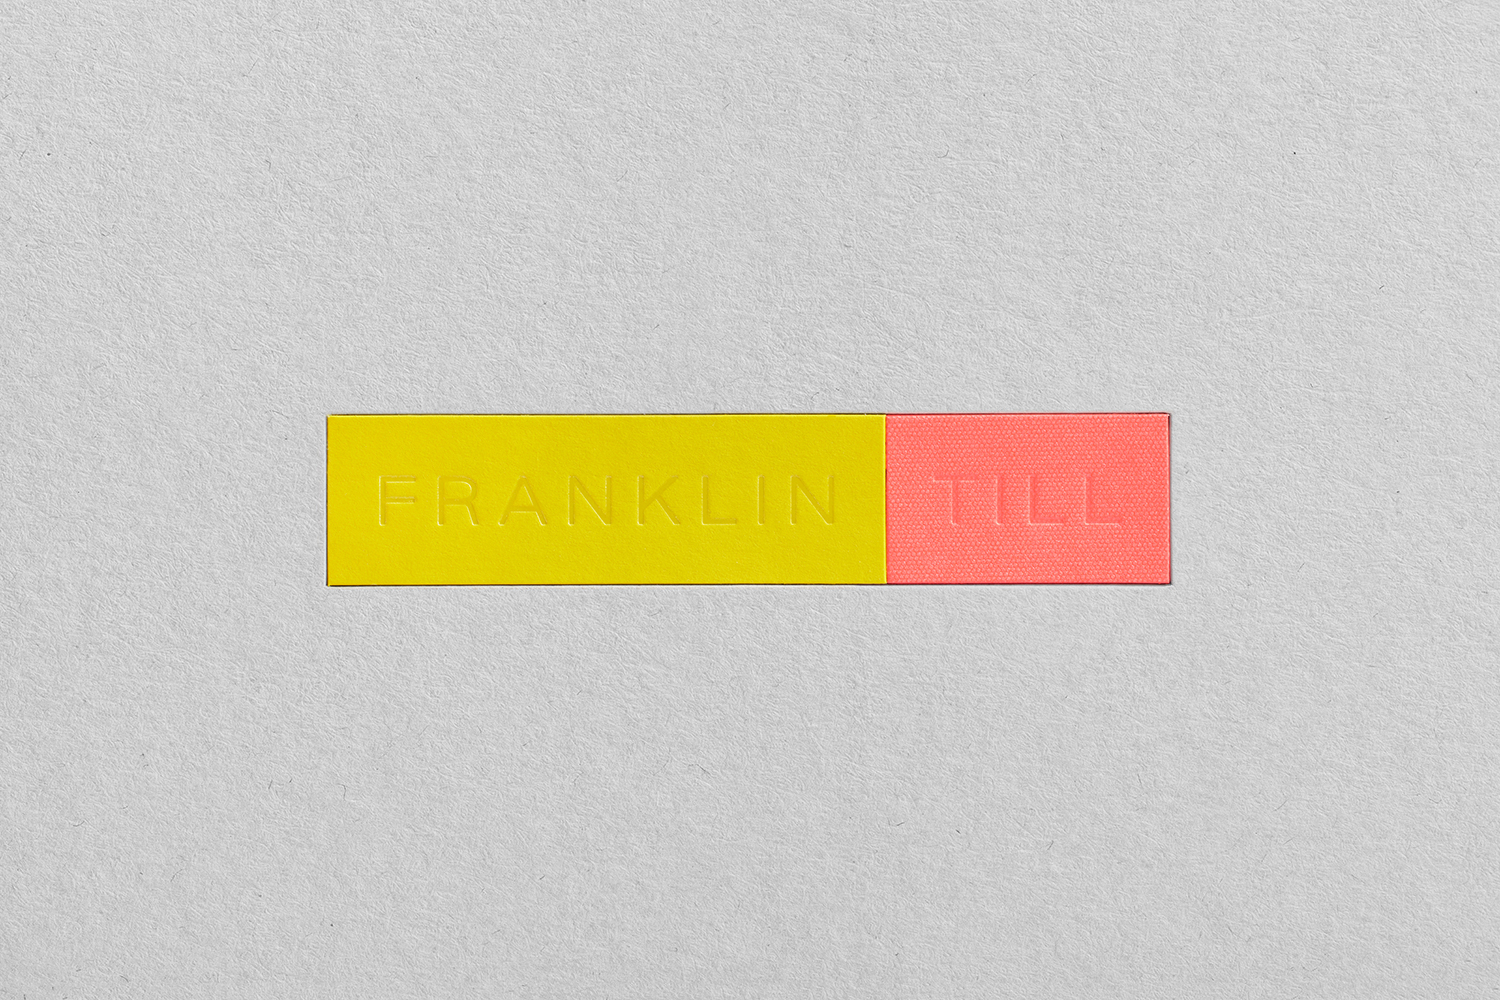 Logo, graphic identity and paper marquetry by Commission for futures research agency FranklinTill